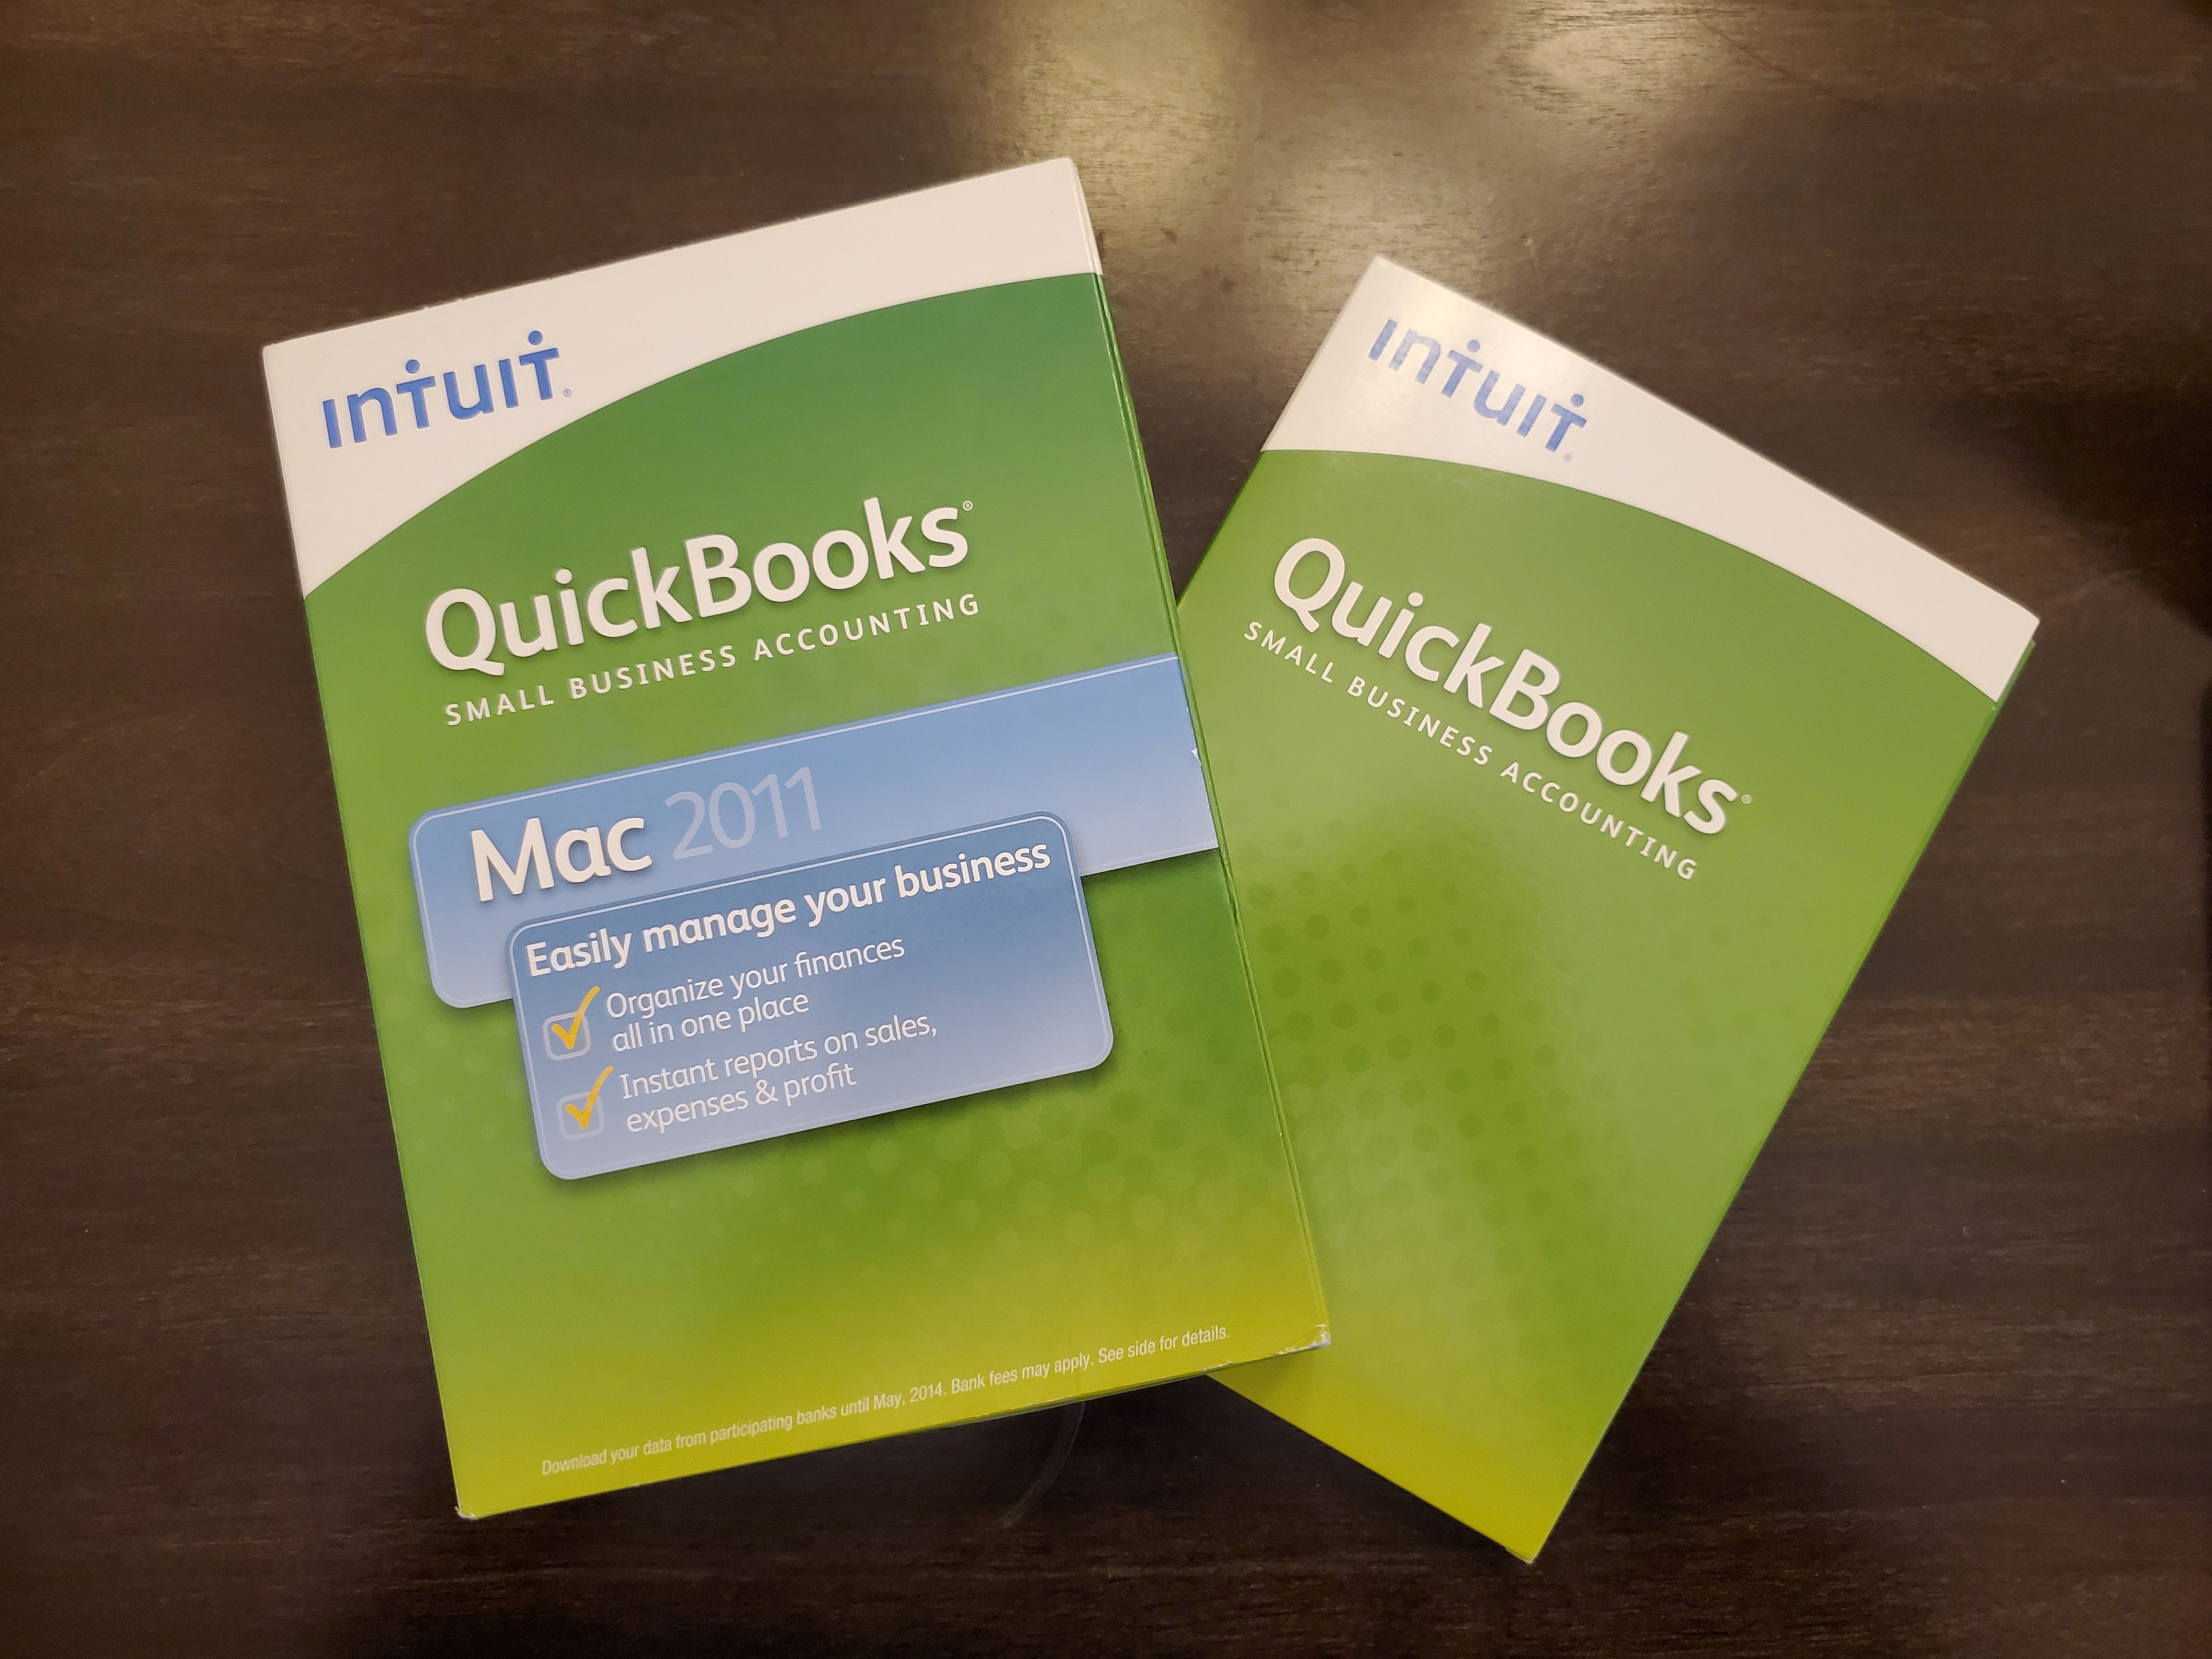 QuickBooks Small Business Accounting for Mac 2011